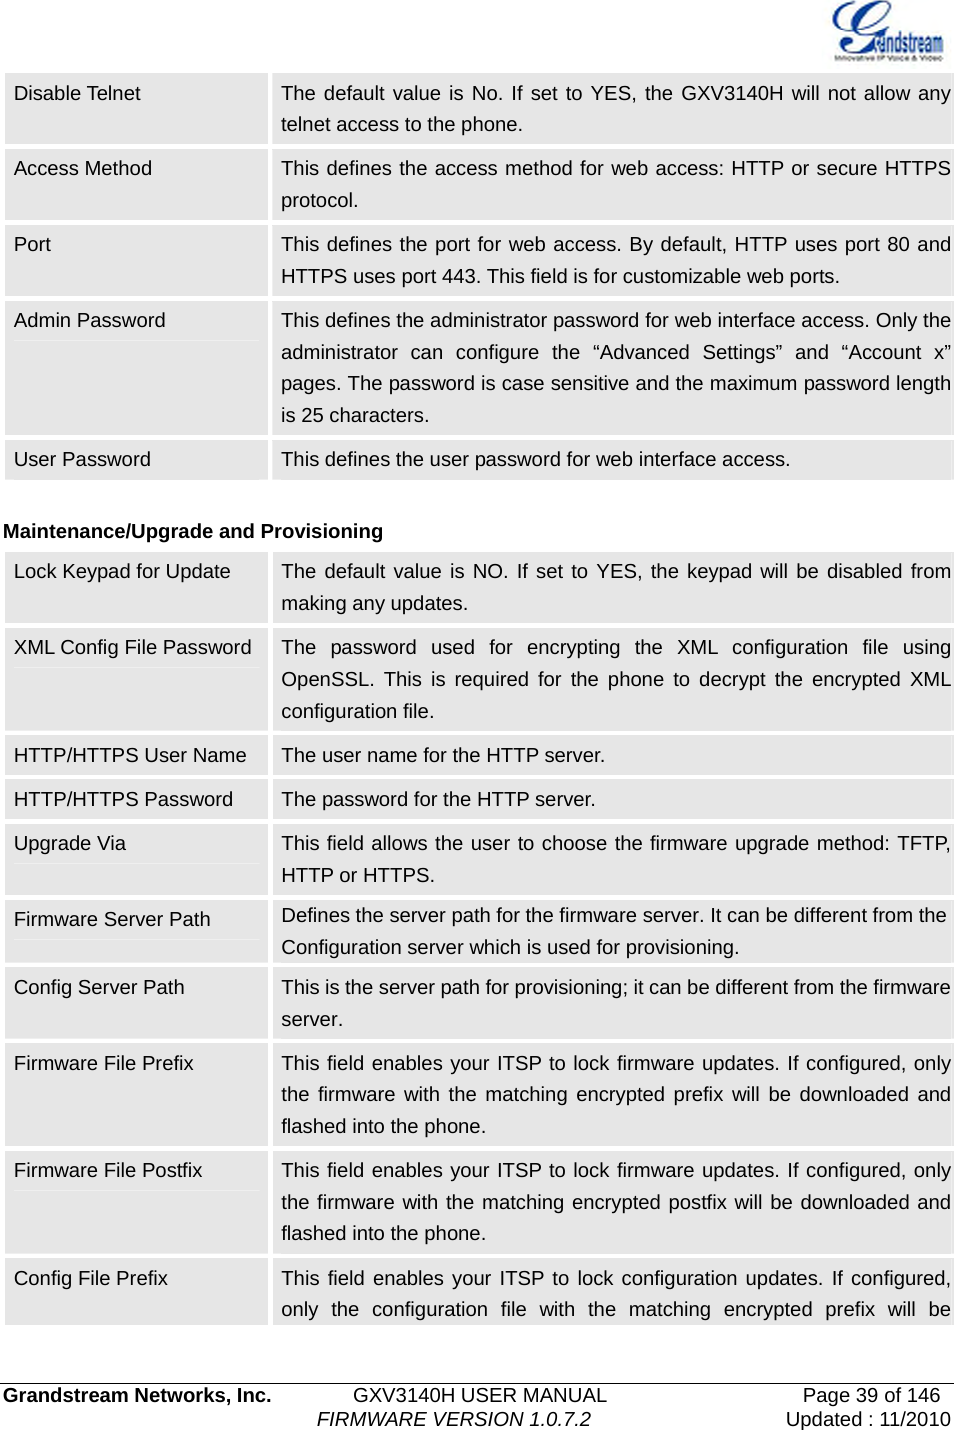   Grandstream Networks, Inc.        GXV3140H USER MANUAL                  Page 39 of 146                                FIRMWARE VERSION 1.0.7.2 Updated : 11/2010  Disable Telnet    The default value is No. If set to YES, the GXV3140H will not allow any telnet access to the phone.   Access Method  This defines the access method for web access: HTTP or secure HTTPS protocol. Port  This defines the port for web access. By default, HTTP uses port 80 and HTTPS uses port 443. This field is for customizable web ports. Admin Password  This defines the administrator password for web interface access. Only the administrator can configure the “Advanced Settings” and “Account x” pages. The password is case sensitive and the maximum password length is 25 characters. User Password  This defines the user password for web interface access.  Maintenance/Upgrade and Provisioning Lock Keypad for Update  The default value is NO. If set to YES, the keypad will be disabled from making any updates. XML Config File Password  The password used for encrypting the XML configuration file using OpenSSL. This is required for the phone to decrypt the encrypted XML configuration file.   HTTP/HTTPS User Name  The user name for the HTTP server. HTTP/HTTPS Password  The password for the HTTP server. Upgrade Via  This field allows the user to choose the firmware upgrade method: TFTP, HTTP or HTTPS. Firmware Server Path  Defines the server path for the firmware server. It can be different from the Configuration server which is used for provisioning. Config Server Path  This is the server path for provisioning; it can be different from the firmware server. Firmware File Prefix  This field enables your ITSP to lock firmware updates. If configured, only the firmware with the matching encrypted prefix will be downloaded and flashed into the phone. Firmware File Postfix  This field enables your ITSP to lock firmware updates. If configured, only the firmware with the matching encrypted postfix will be downloaded and flashed into the phone. Config File Prefix  This field enables your ITSP to lock configuration updates. If configured, only the configuration file with the matching encrypted prefix will be 